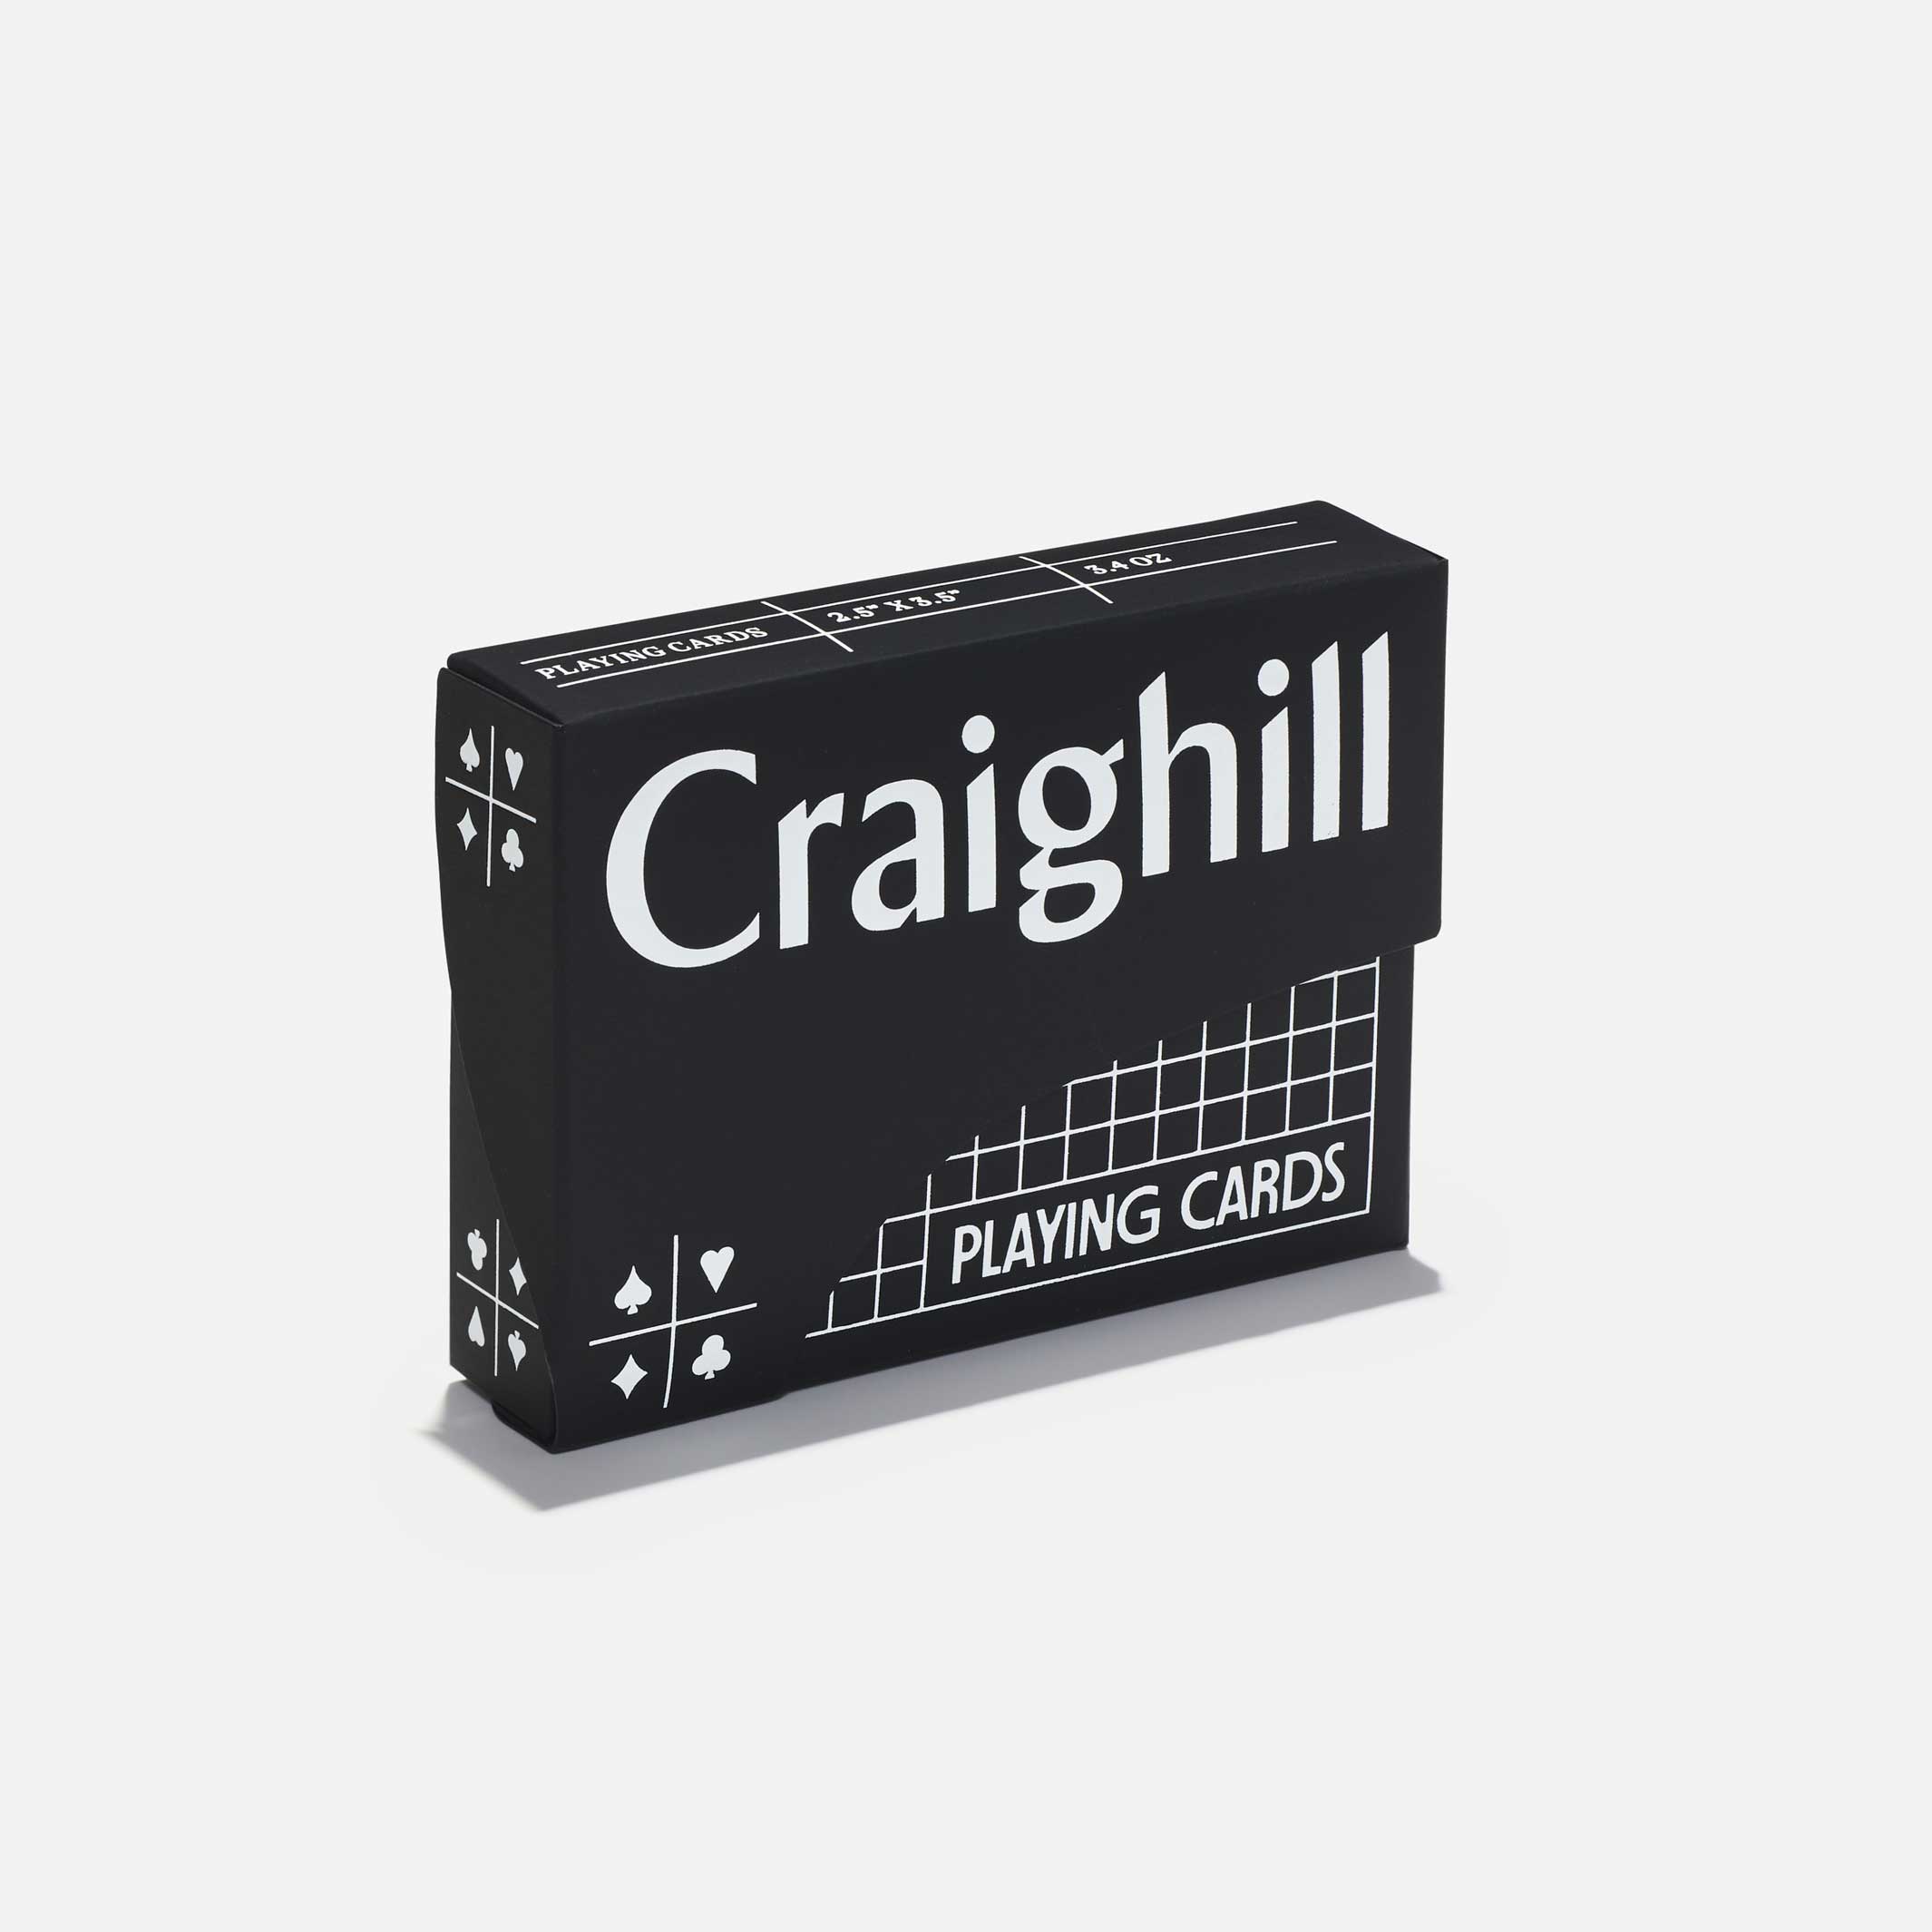 PLAYING CARDS | Black pack with black cards | Craighill